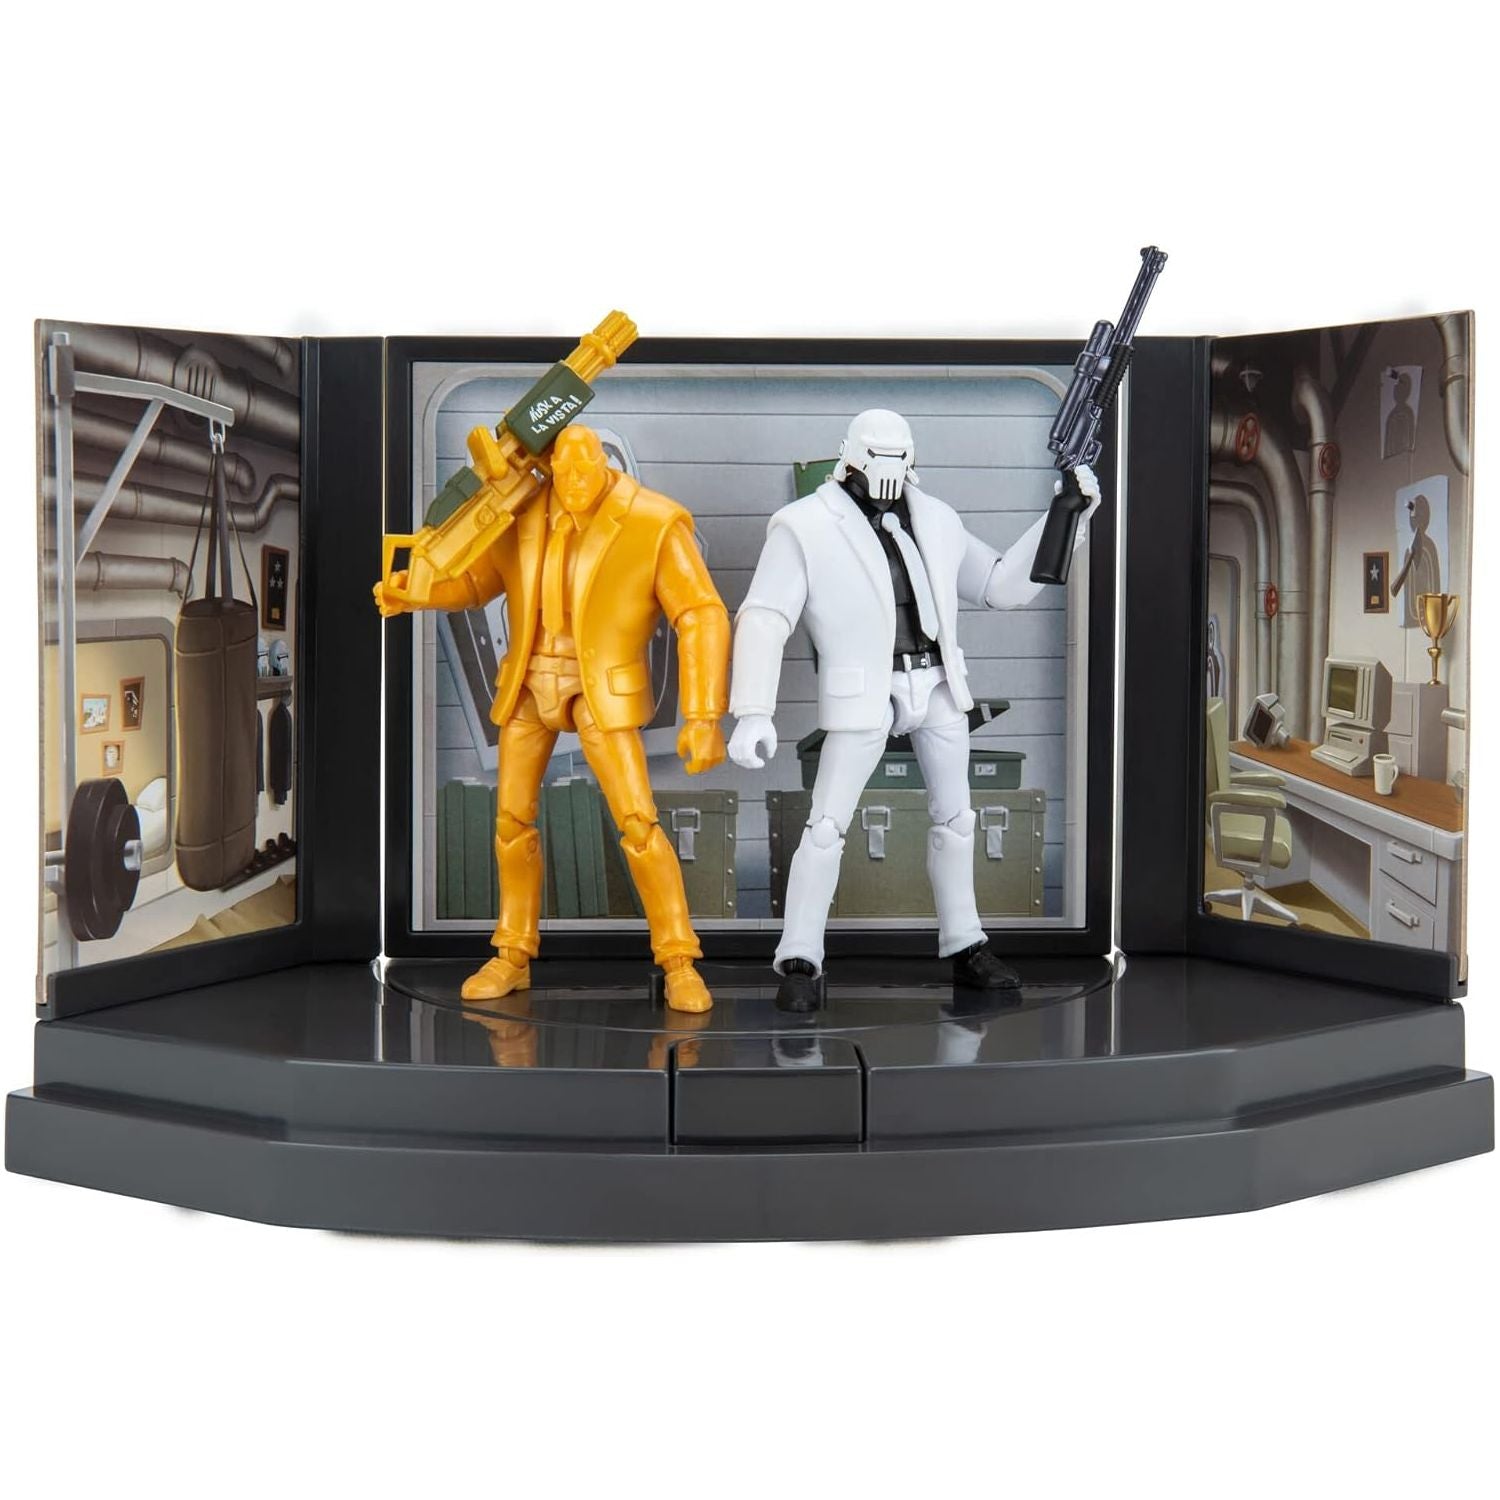 Fortnite Brutus Agent’s Room Featured Playset with Two 4-inch Articulated Figures Plus Weapons and Accessories